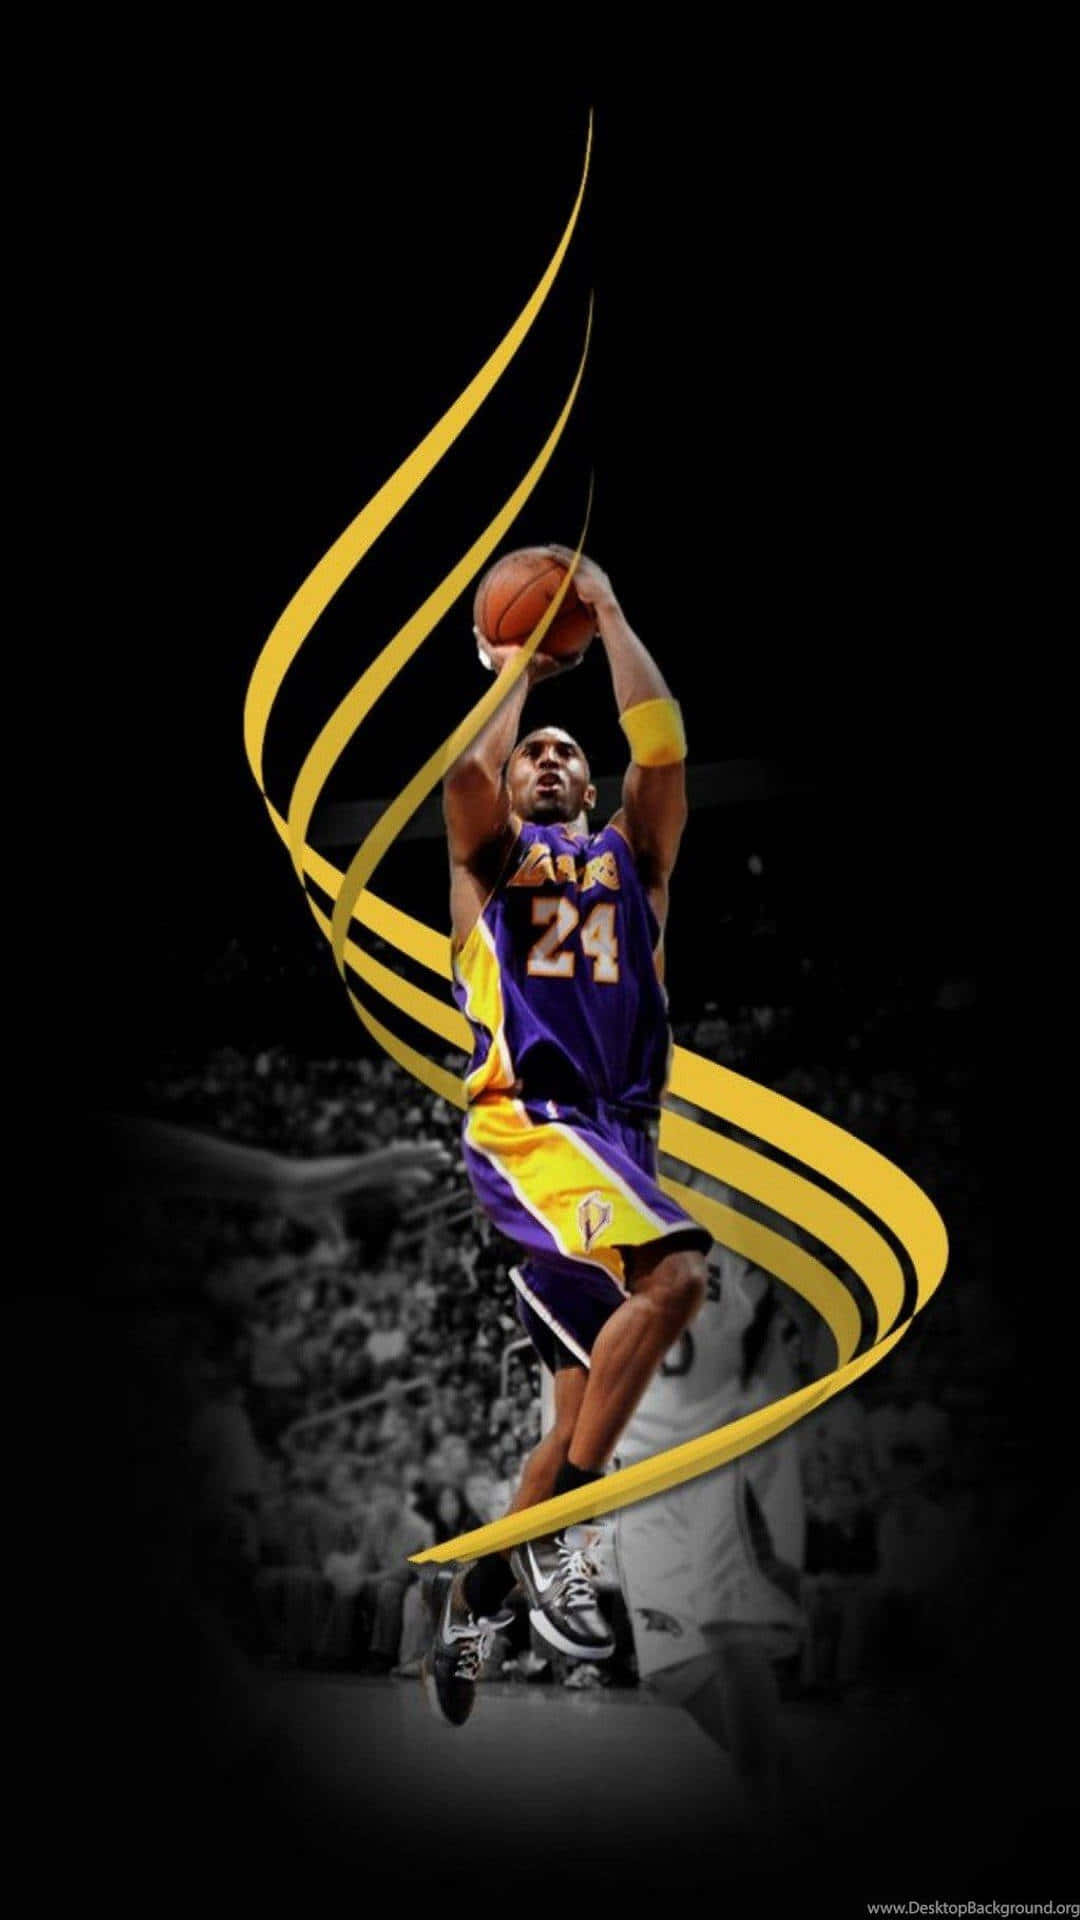 Get your hands on the new Kobe Bryant Phone Wallpaper